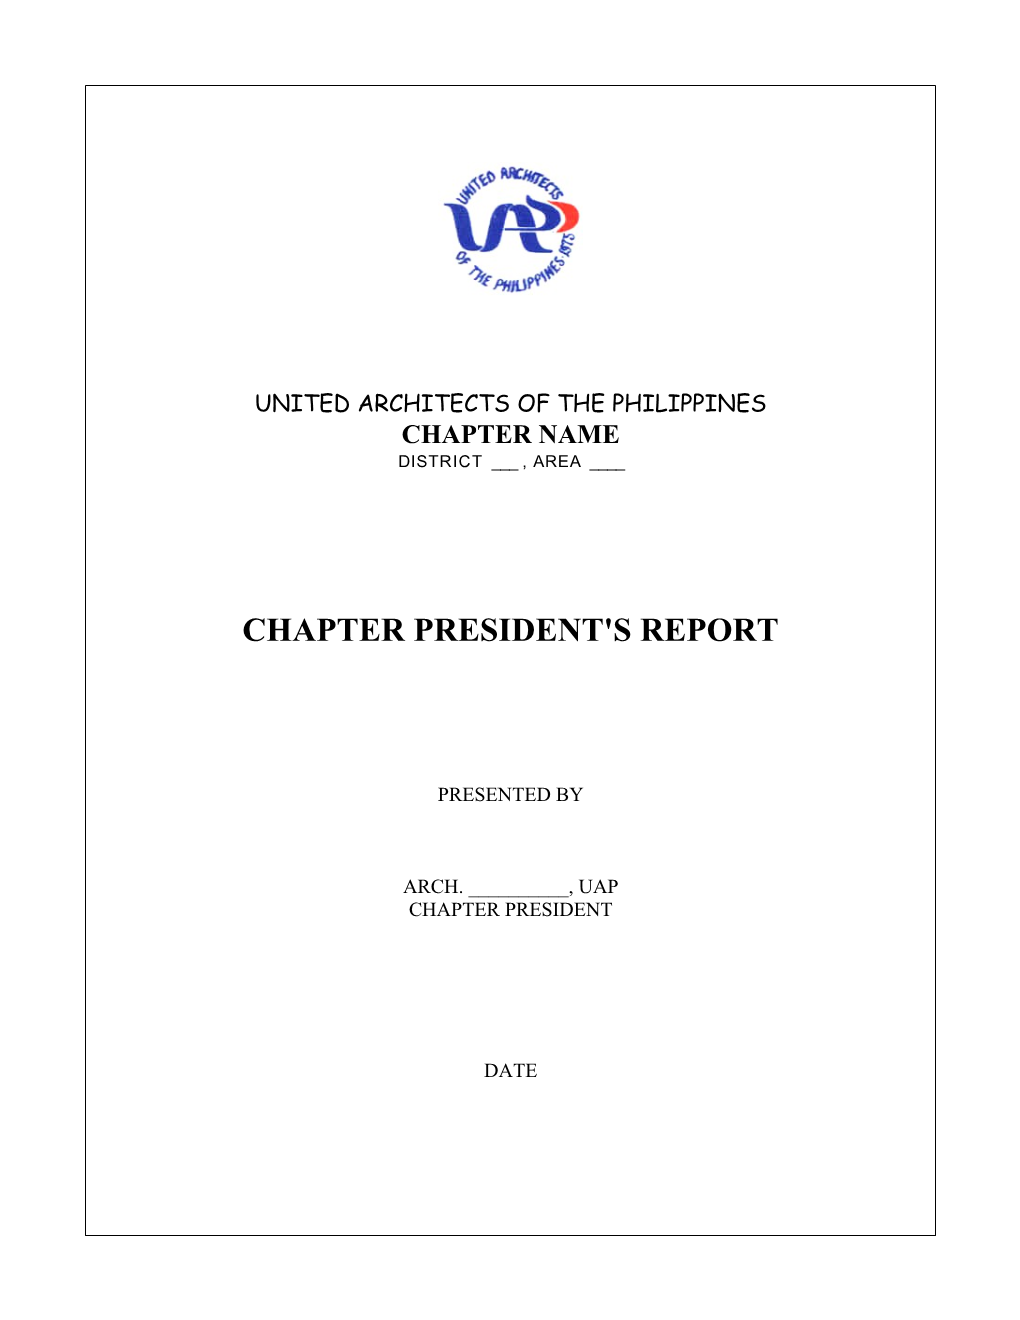 UAP Chapter President's Report Template